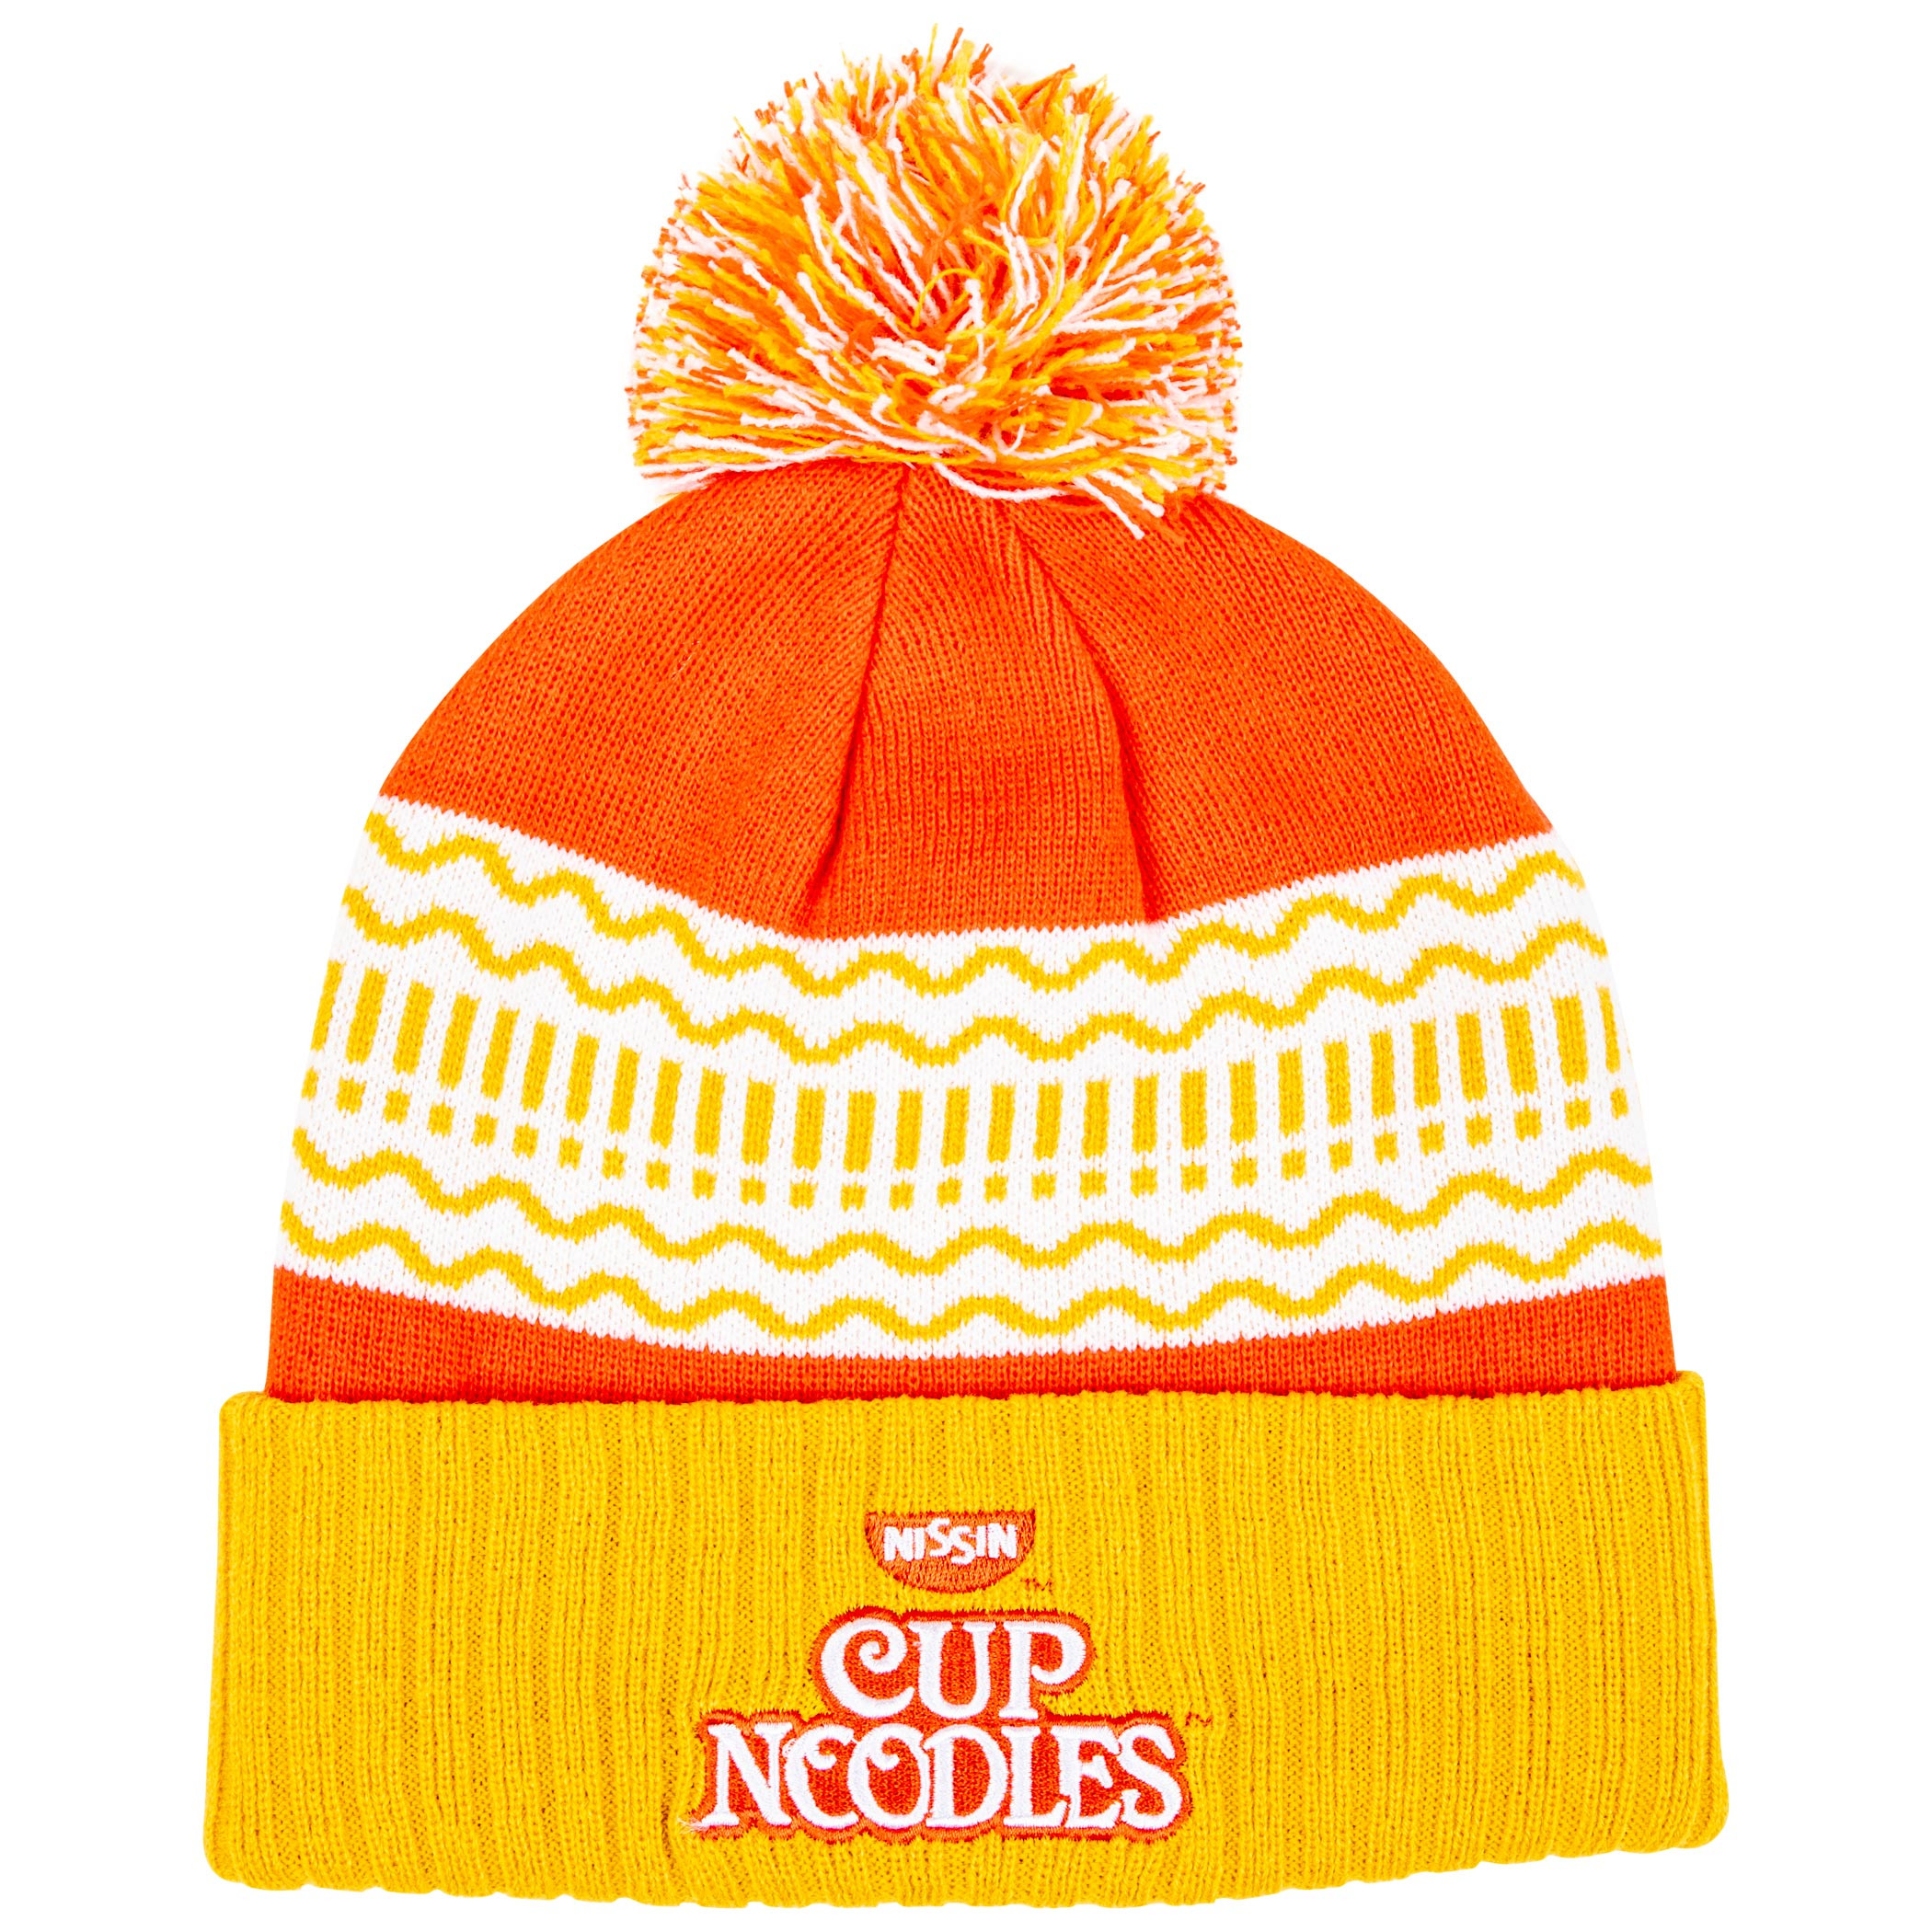 Cup Noodles Text Brand Cuff Pom Knit Beanie